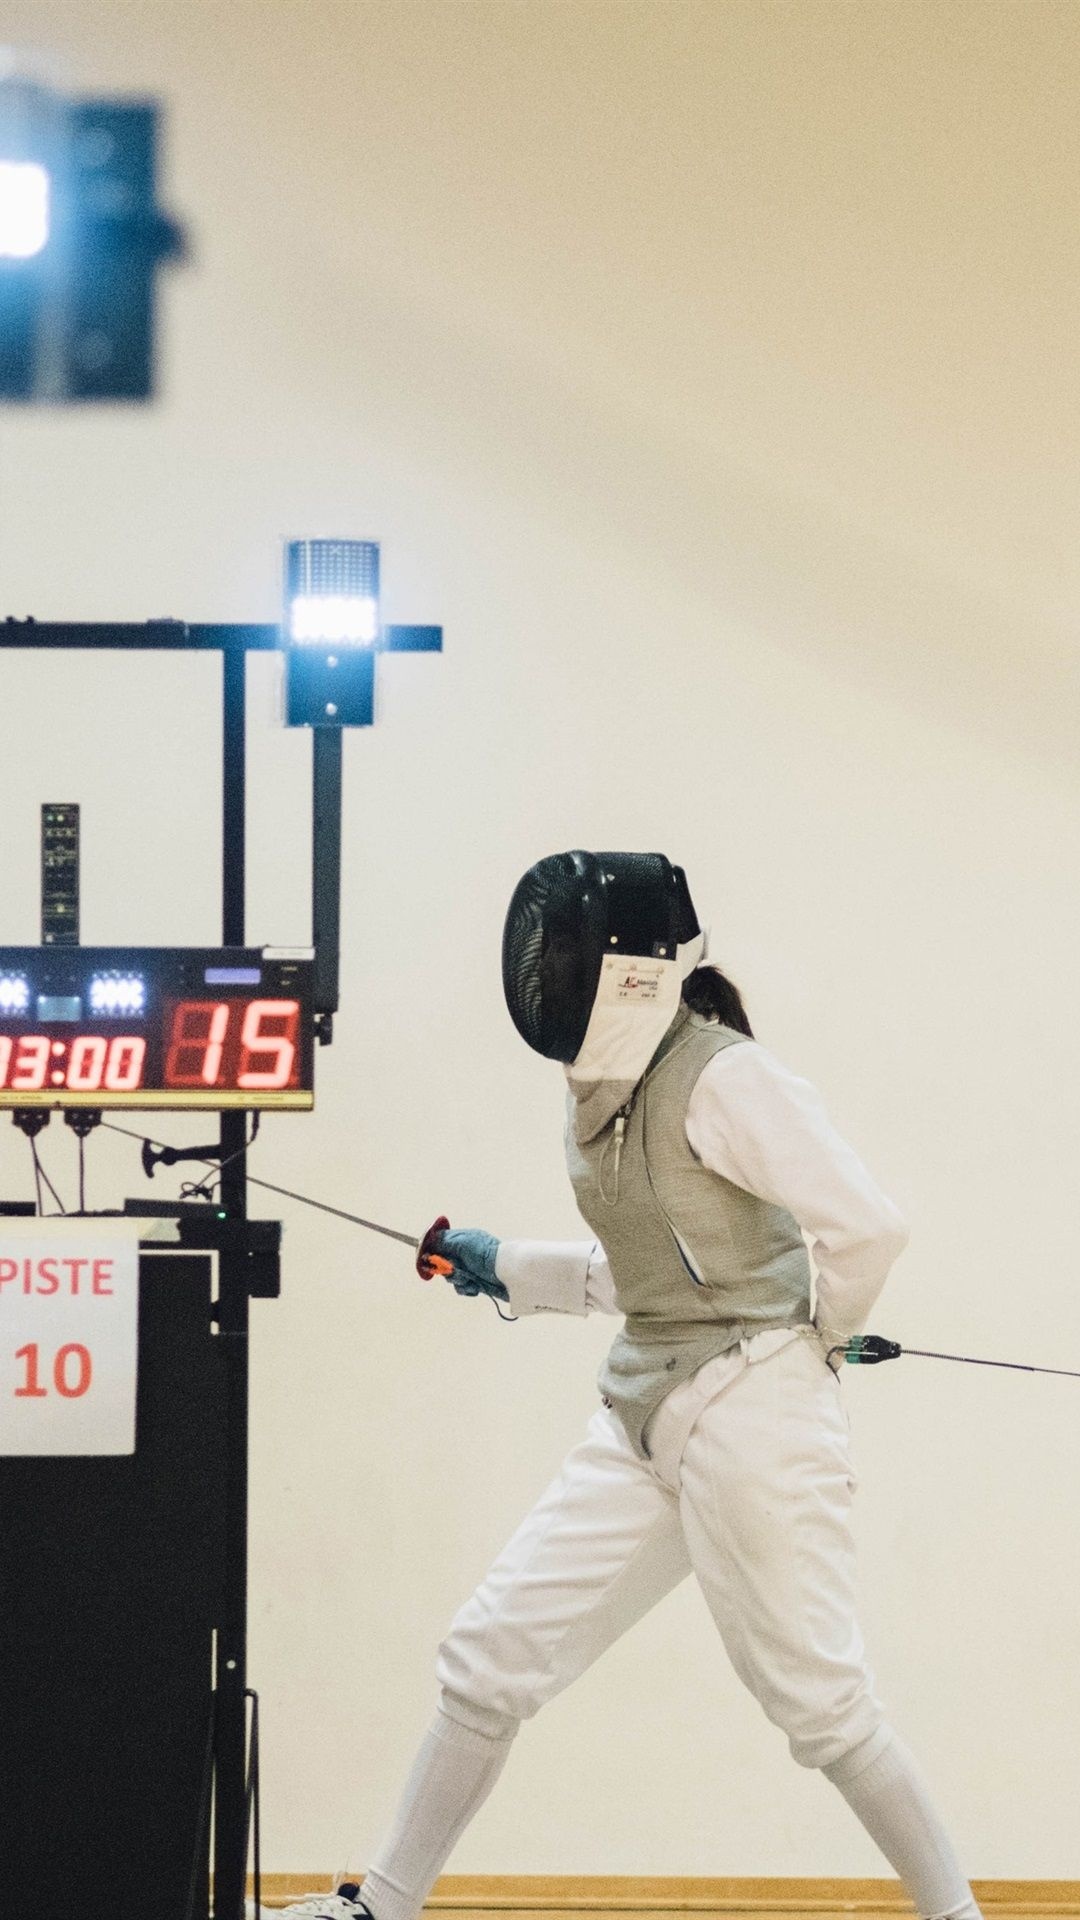 Fencing: Foil fencer practices defensive techniques before the actual duel, Combat sports. 1080x1920 Full HD Wallpaper.